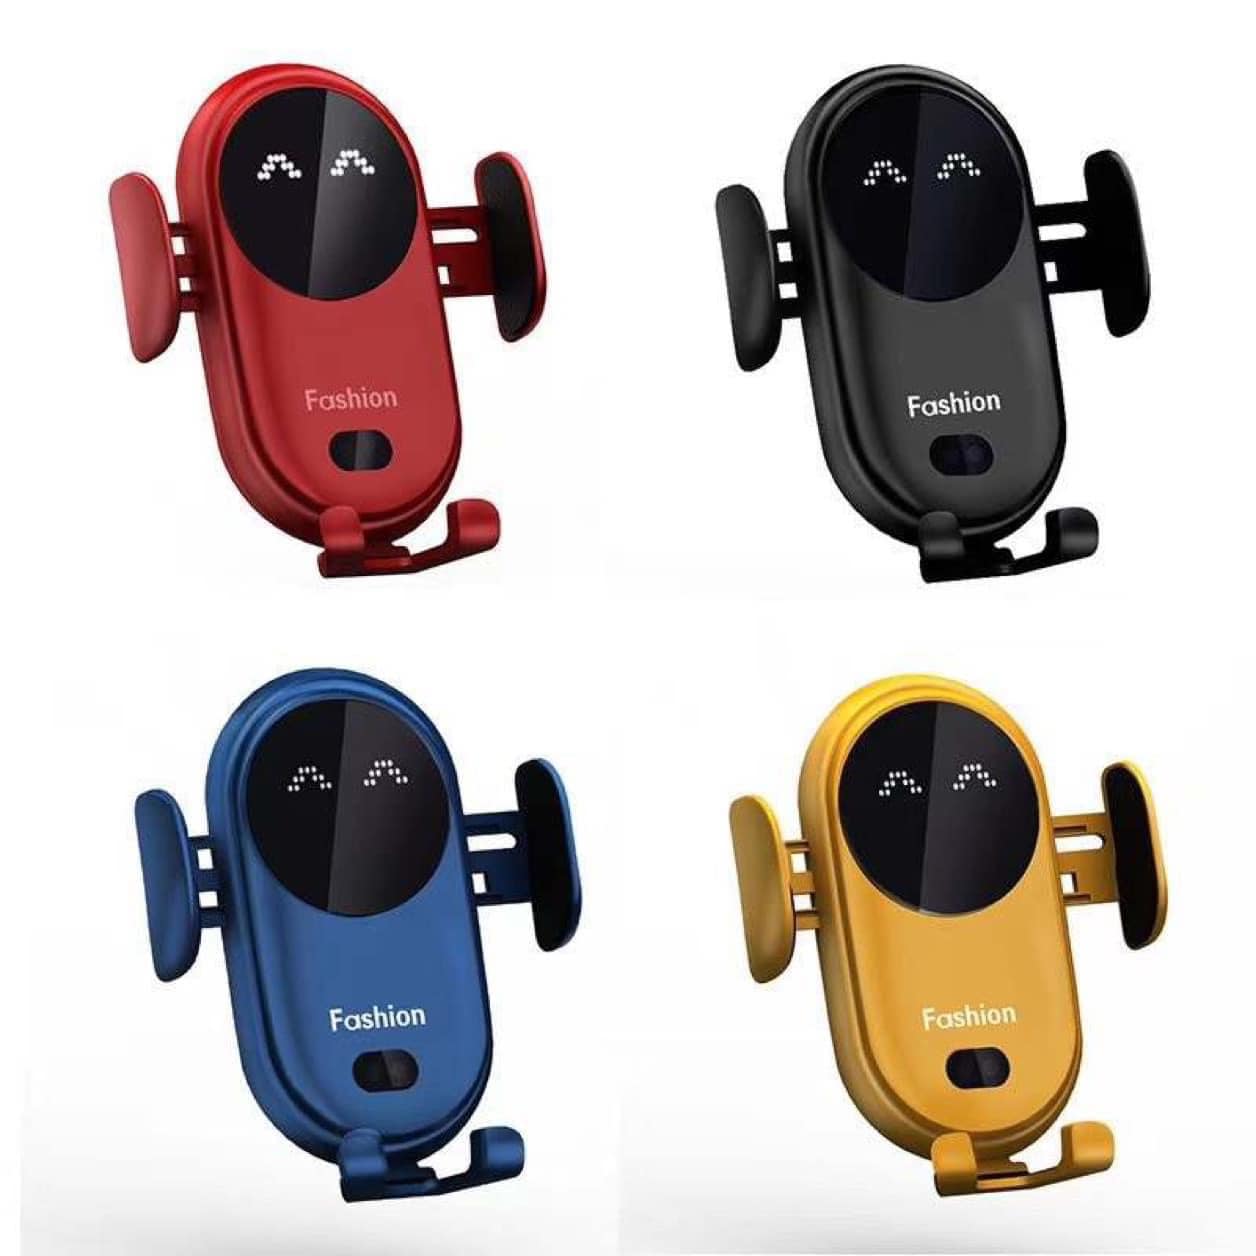 Robby Car Charge phone mount PREORDER- ships approx 12/12